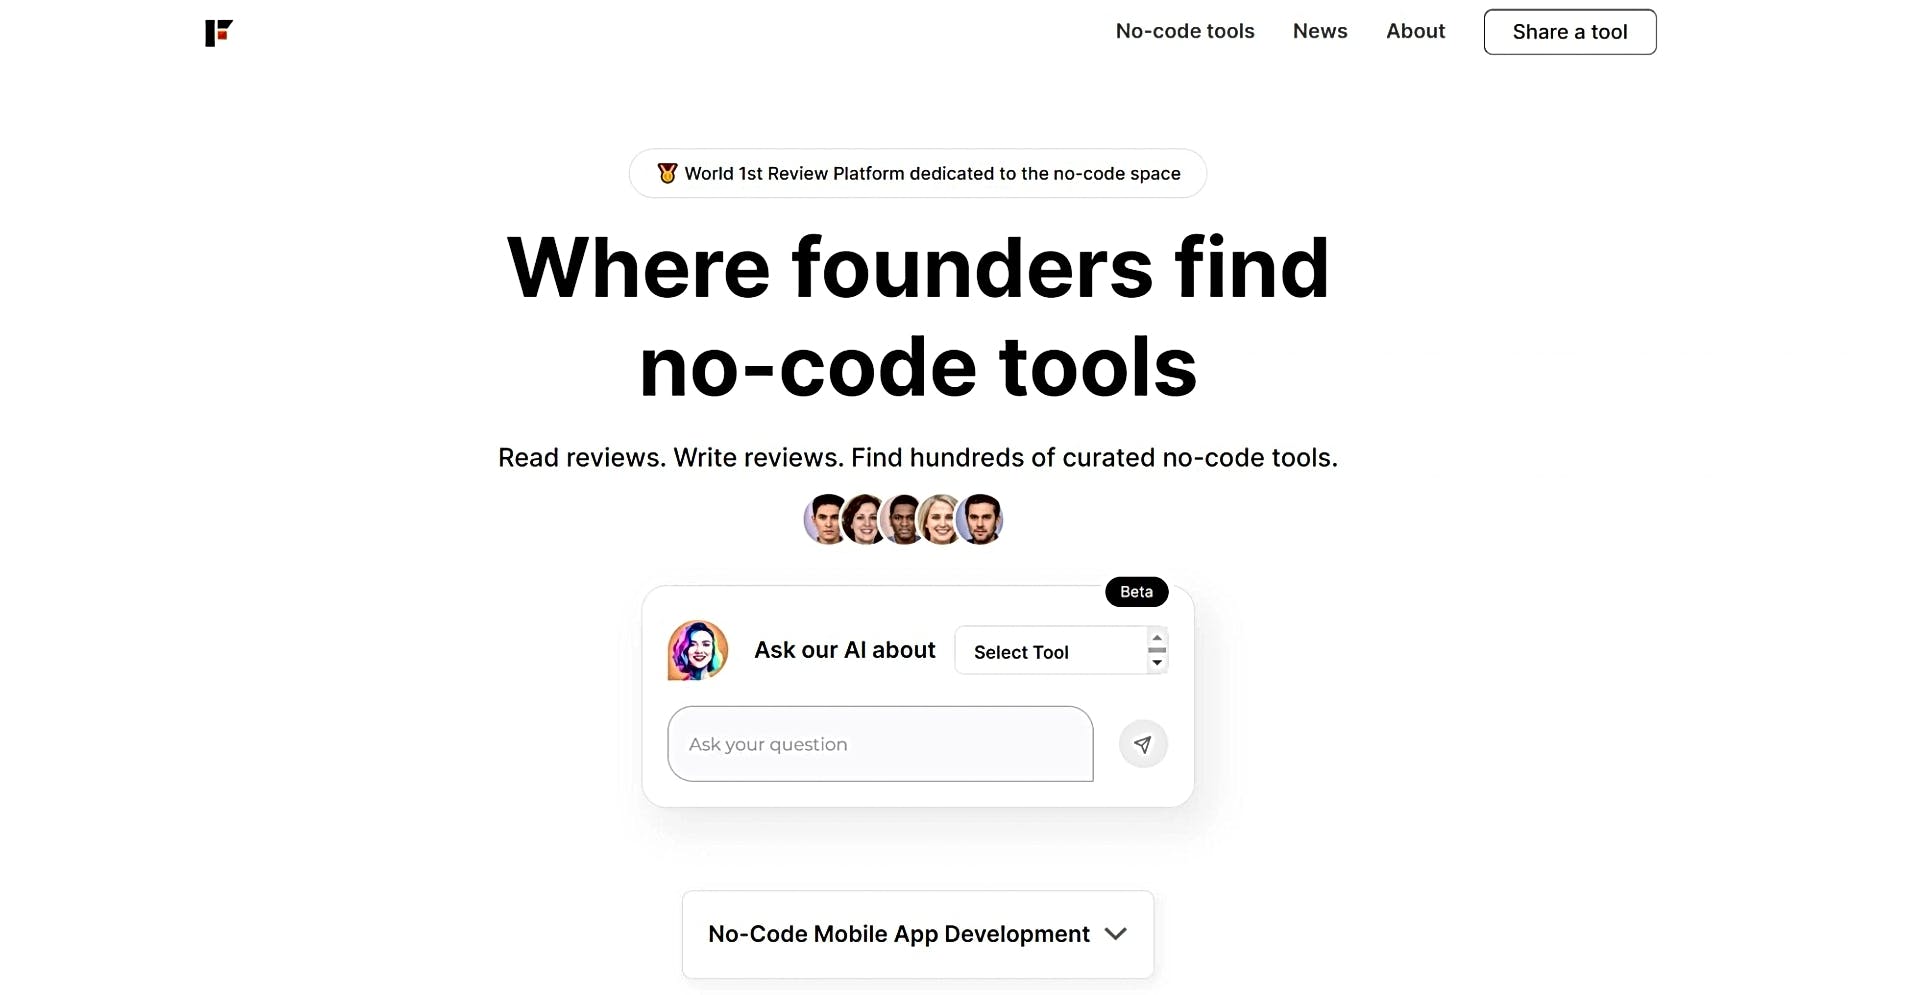 No Code Family featured